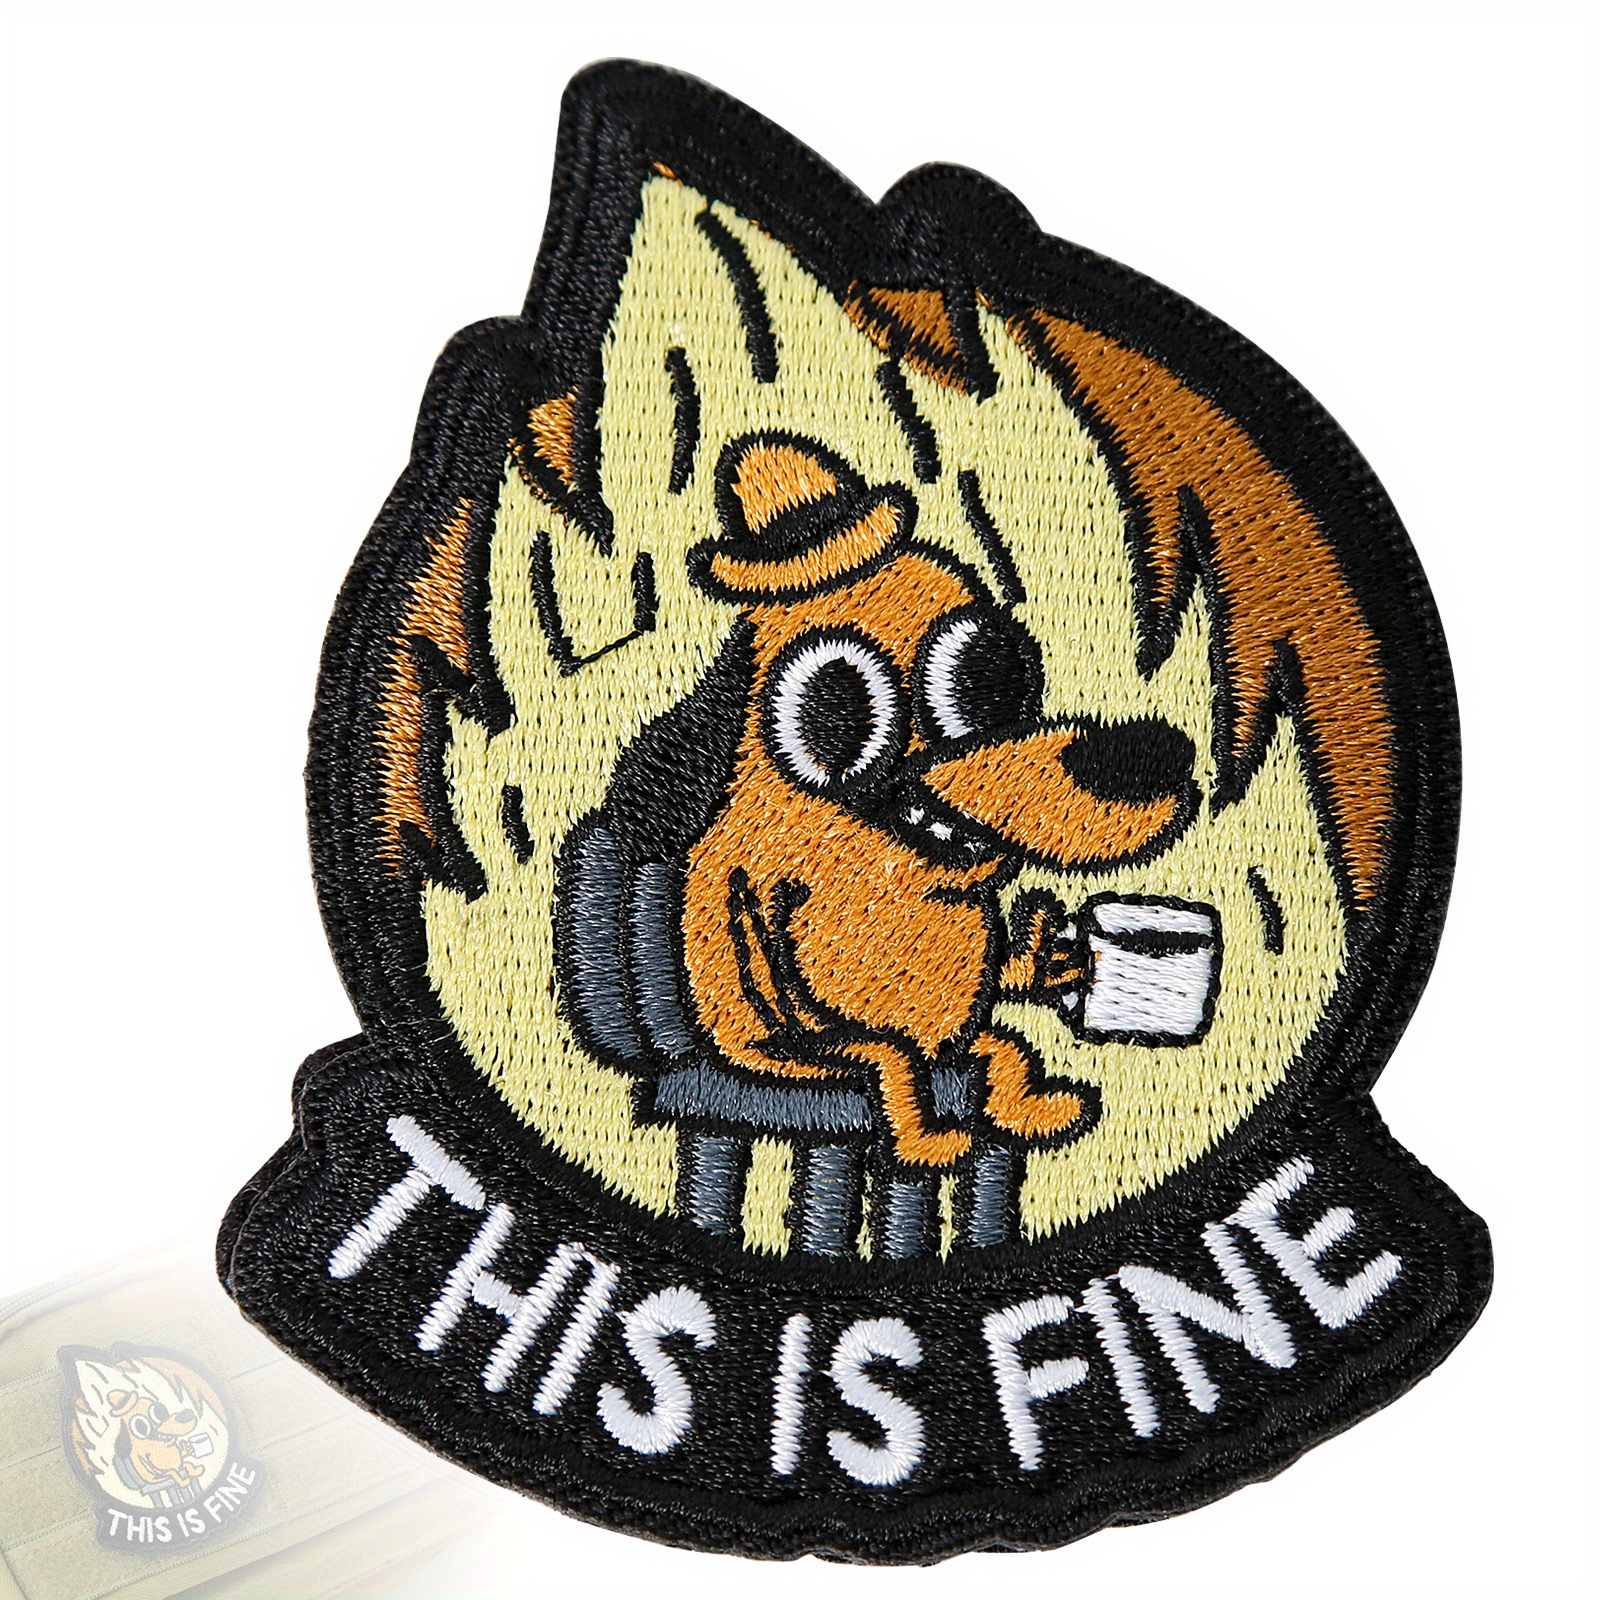 Quality Funny Patches  Funny Morale, Hook and Loop & Military Patches